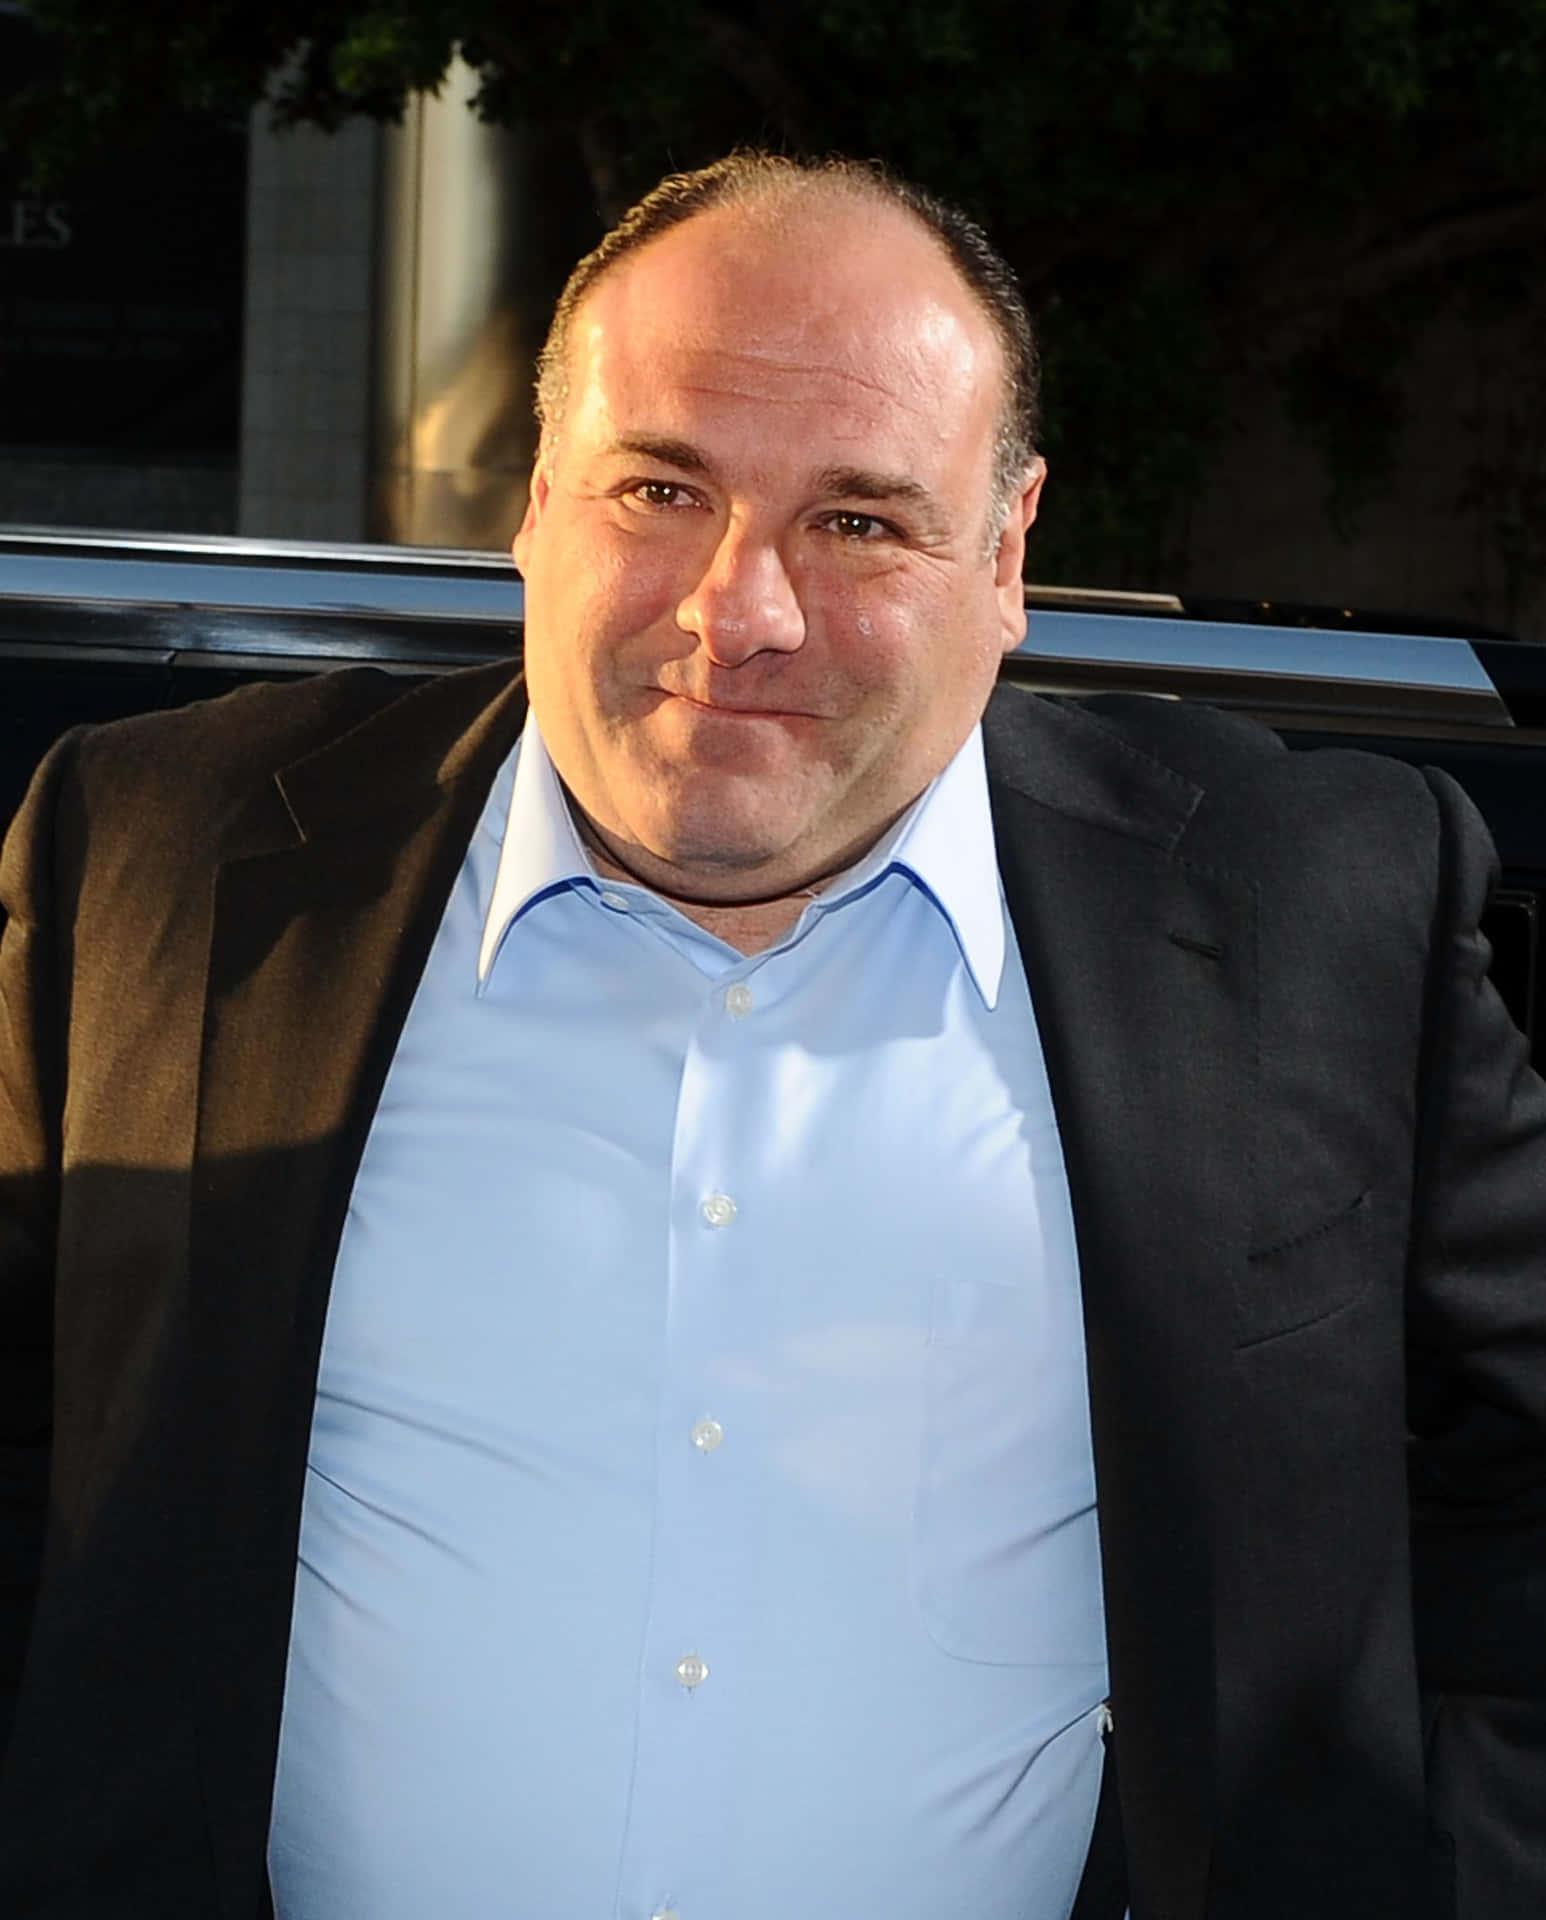 Jamesgandolfini Is An Actor Known For His Role As Tony Soprano On The Tv Series 